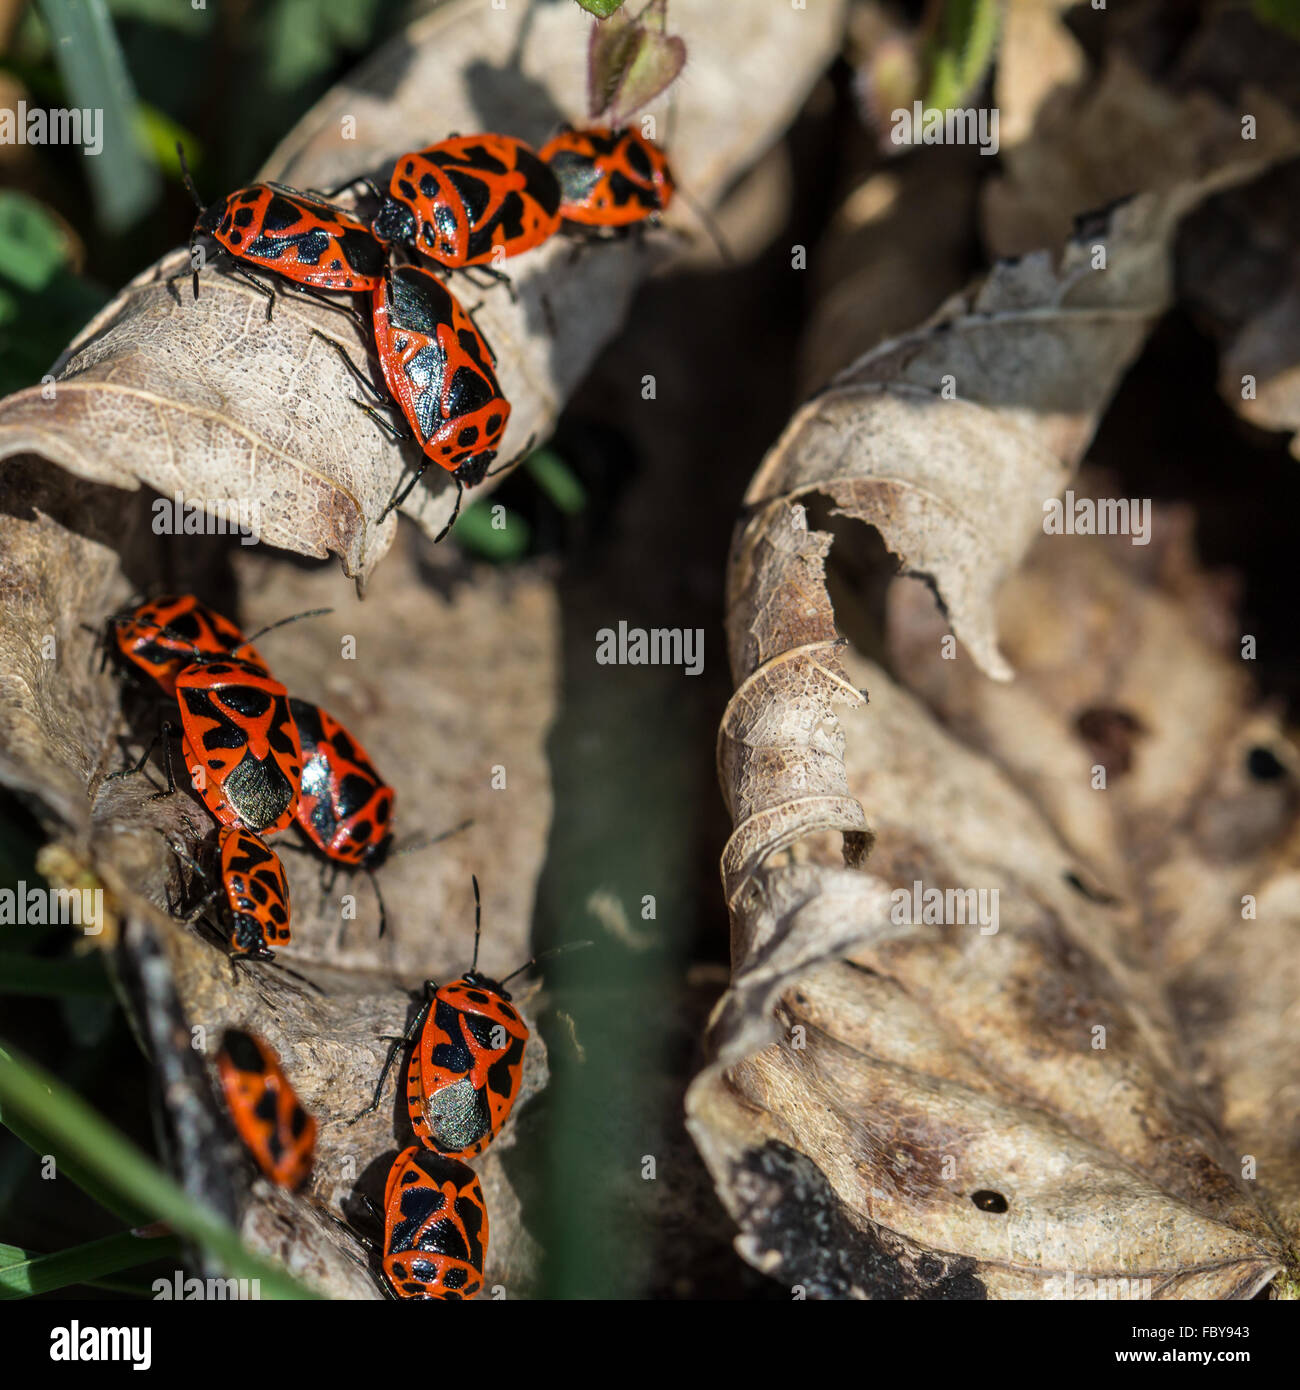 Group of fire bugs on dry leaves Stock Photo